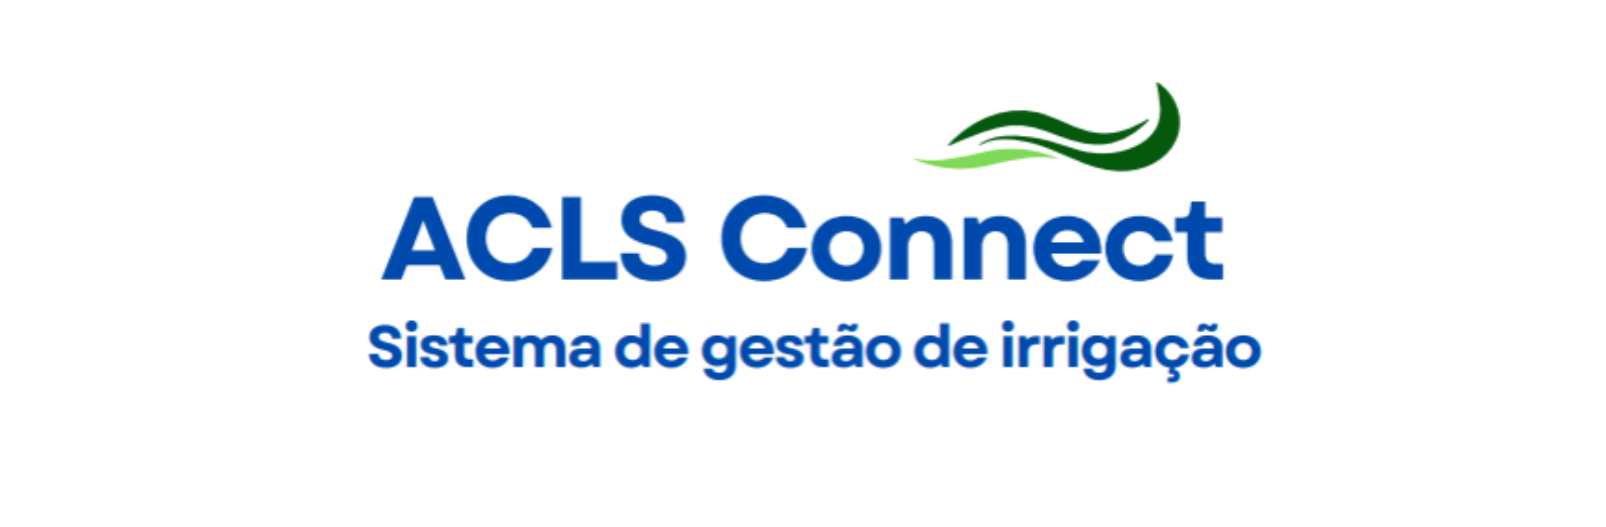 ACLS CONNECT